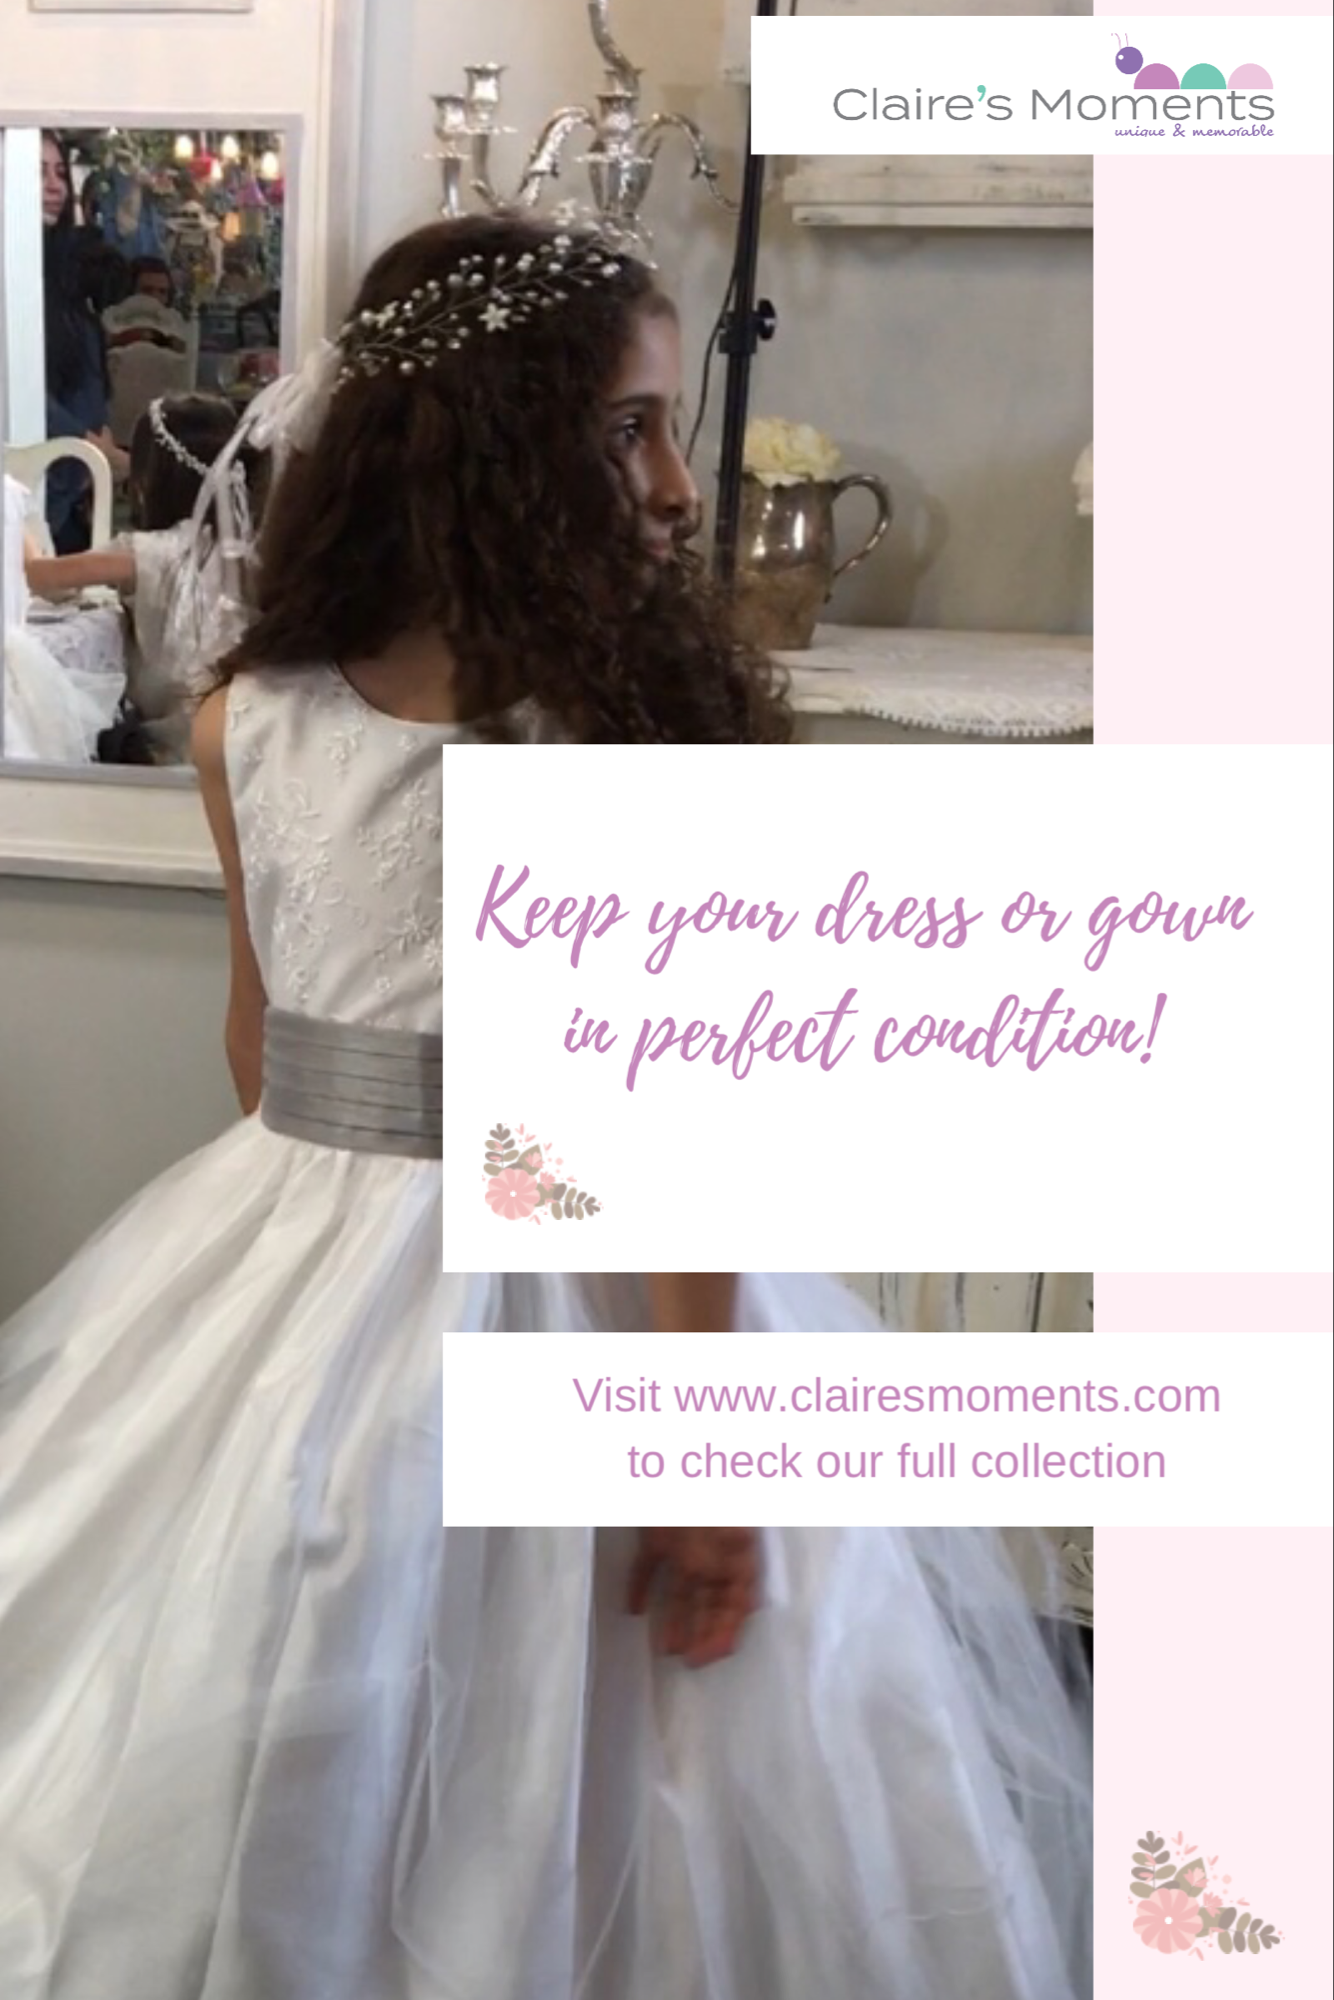 Keep your dress or gown in perfect condition!